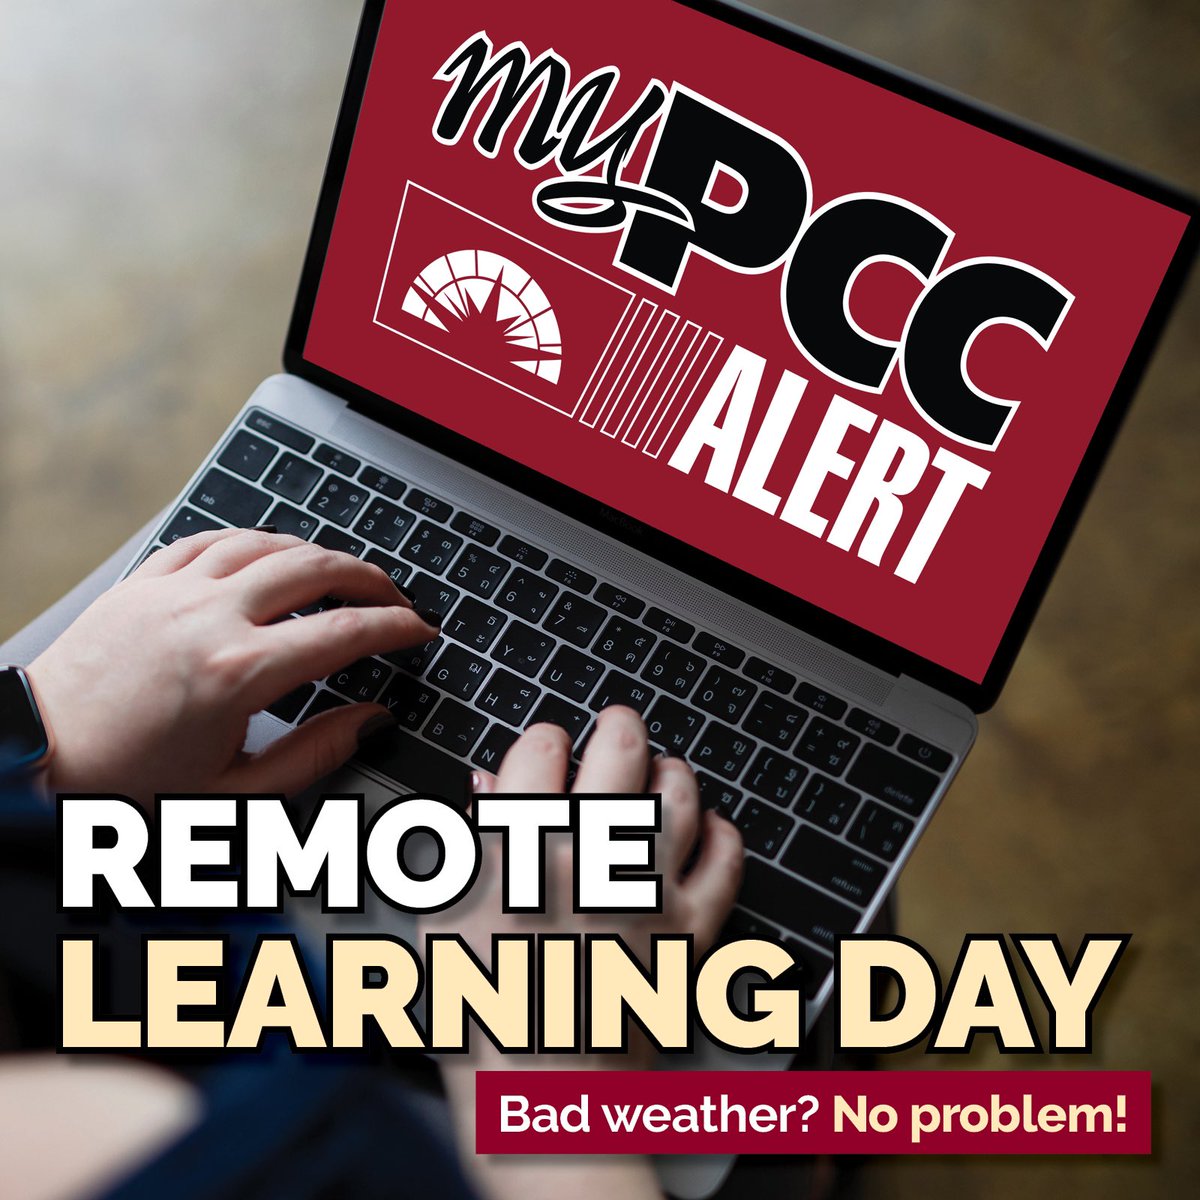 PCC SOUTHWEST: Due to weather, all Southwest campuses & sites will be on remote status Friday, Feb. 2. Students, check MyCourses for specific class instructions. All nonessential employees will work remotely. Info: Pueblocc.edu/weather #MyPCCAlert